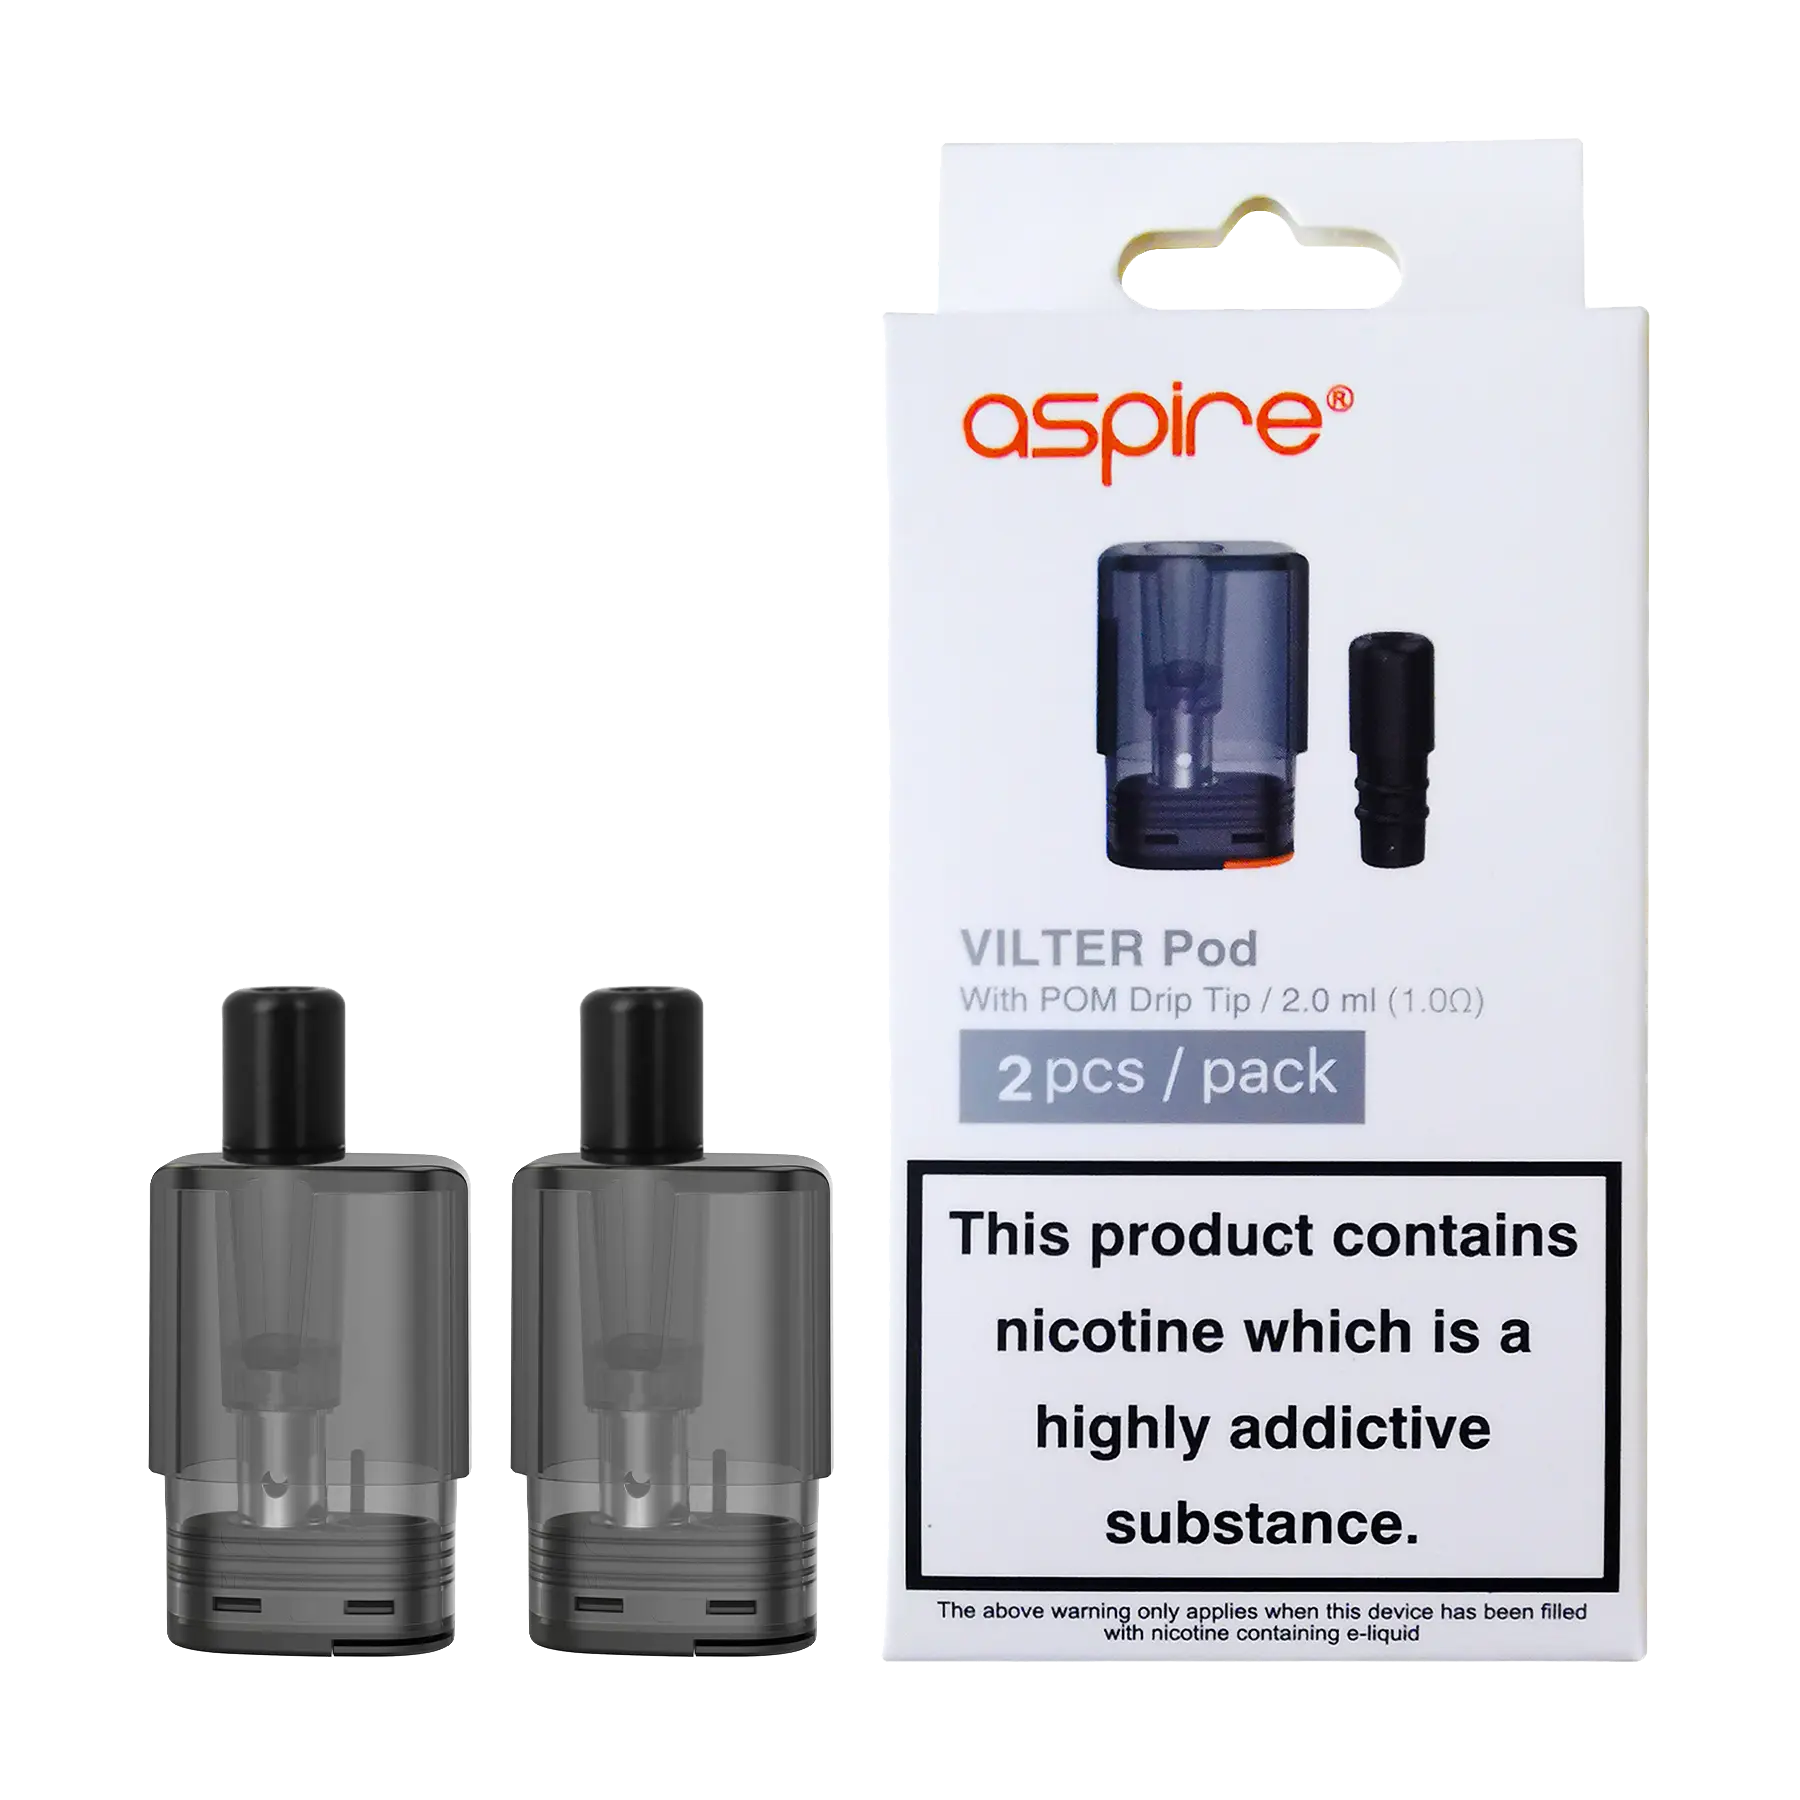 Aspire UK Vilter Replacement Pods & POM Drip Tips - 1.0 ohm (Pack of 2)